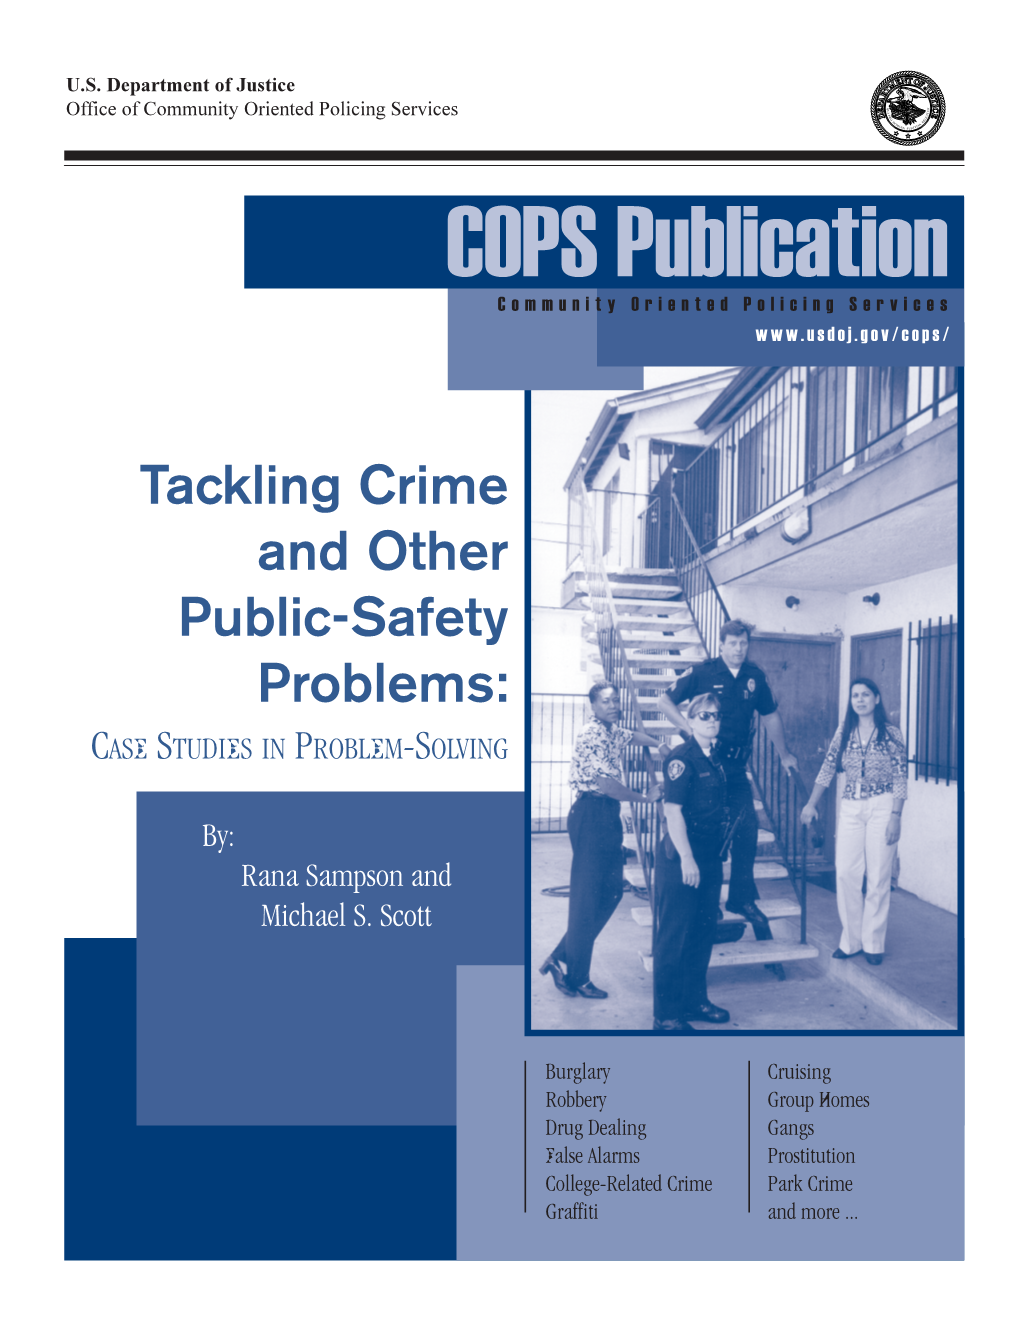 Tackling Crime and Other Public-Safety Problems: CASE STUDIES in PROBLEM-SOLVING